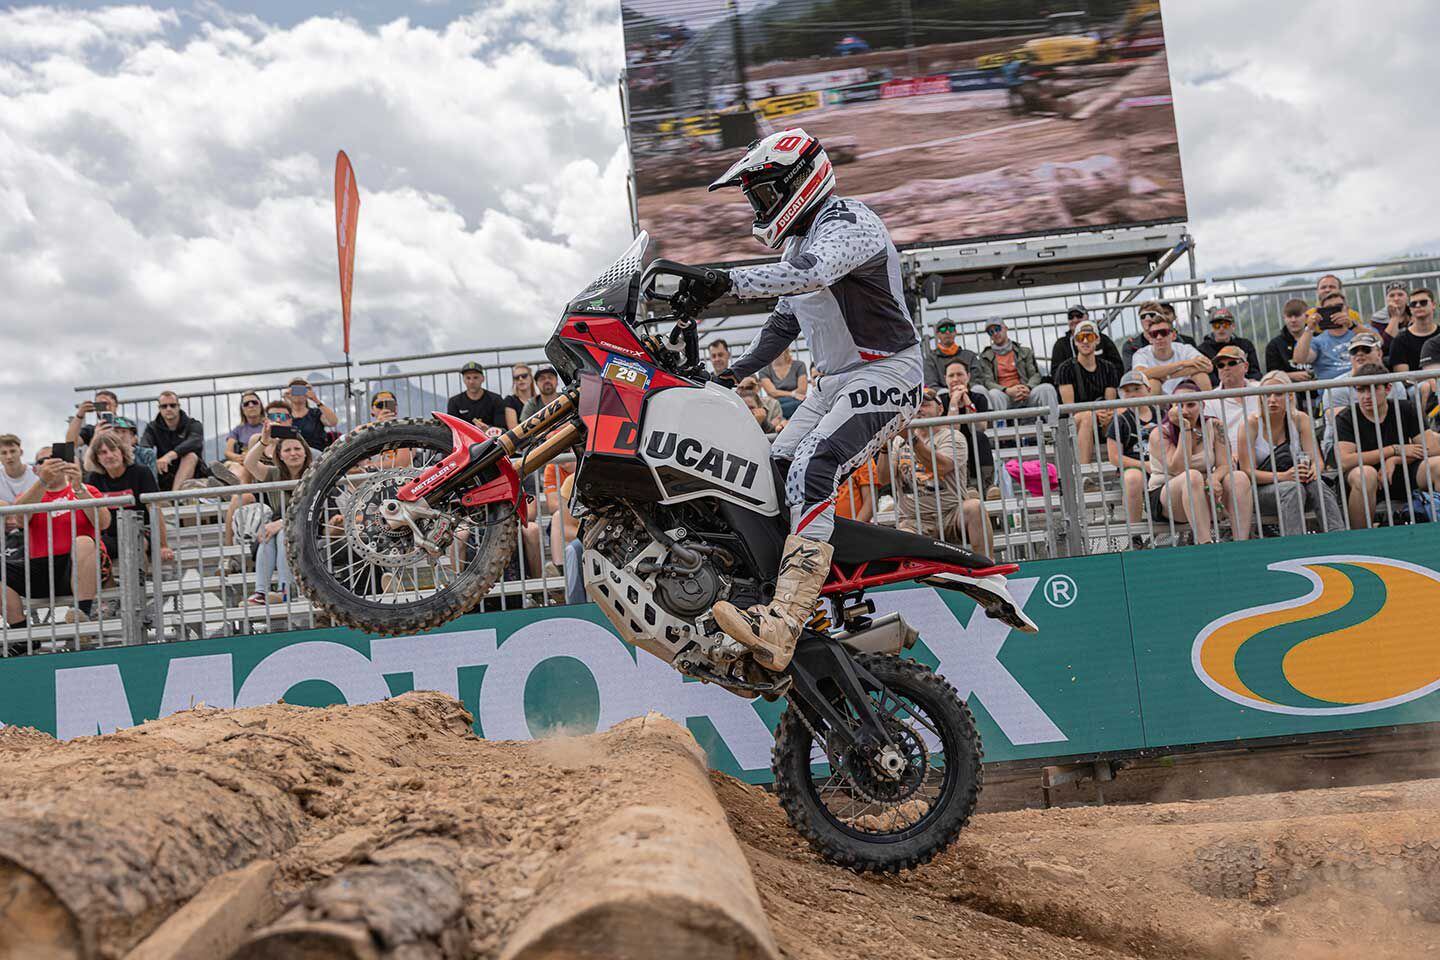 Antoine Méo rode a modified DesertX at the Erzberg Rodeo, one which we believe closely resembles the new DesertX Rally.